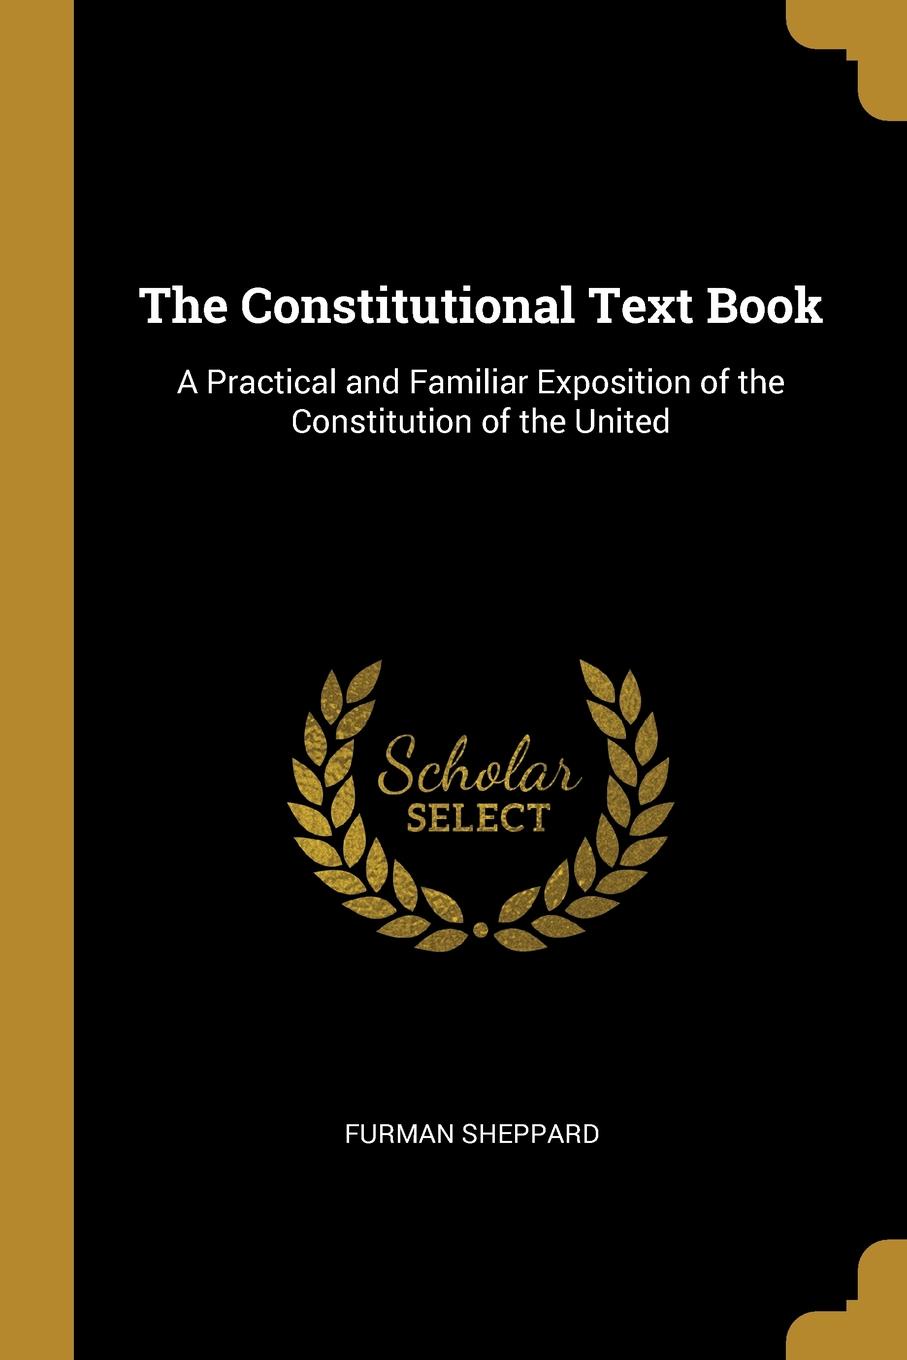 The Constitutional Text Book. A Practical and Familiar Exposition of the Constitution of the United